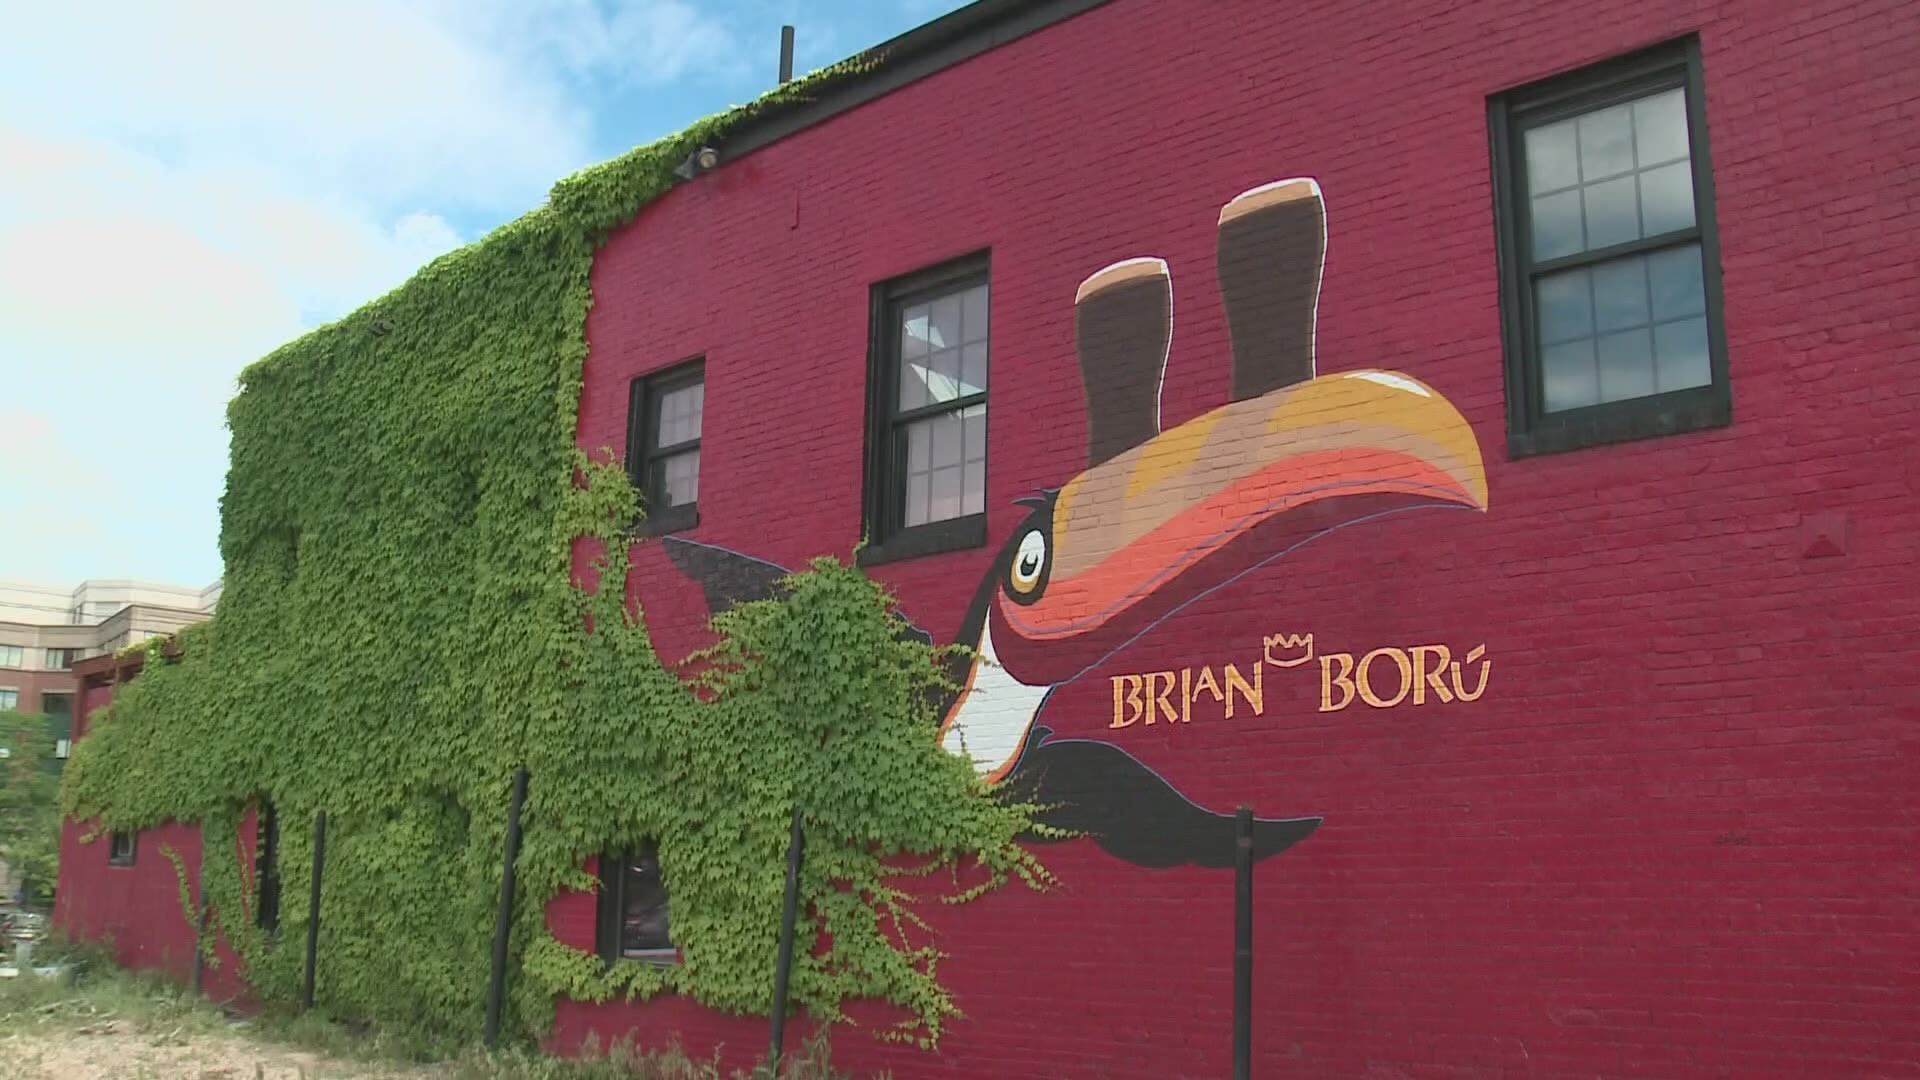 The company that bought the building that housed Brian Boru, a landmark Irish pub in Portland's Old Port, applied for a demolition permit